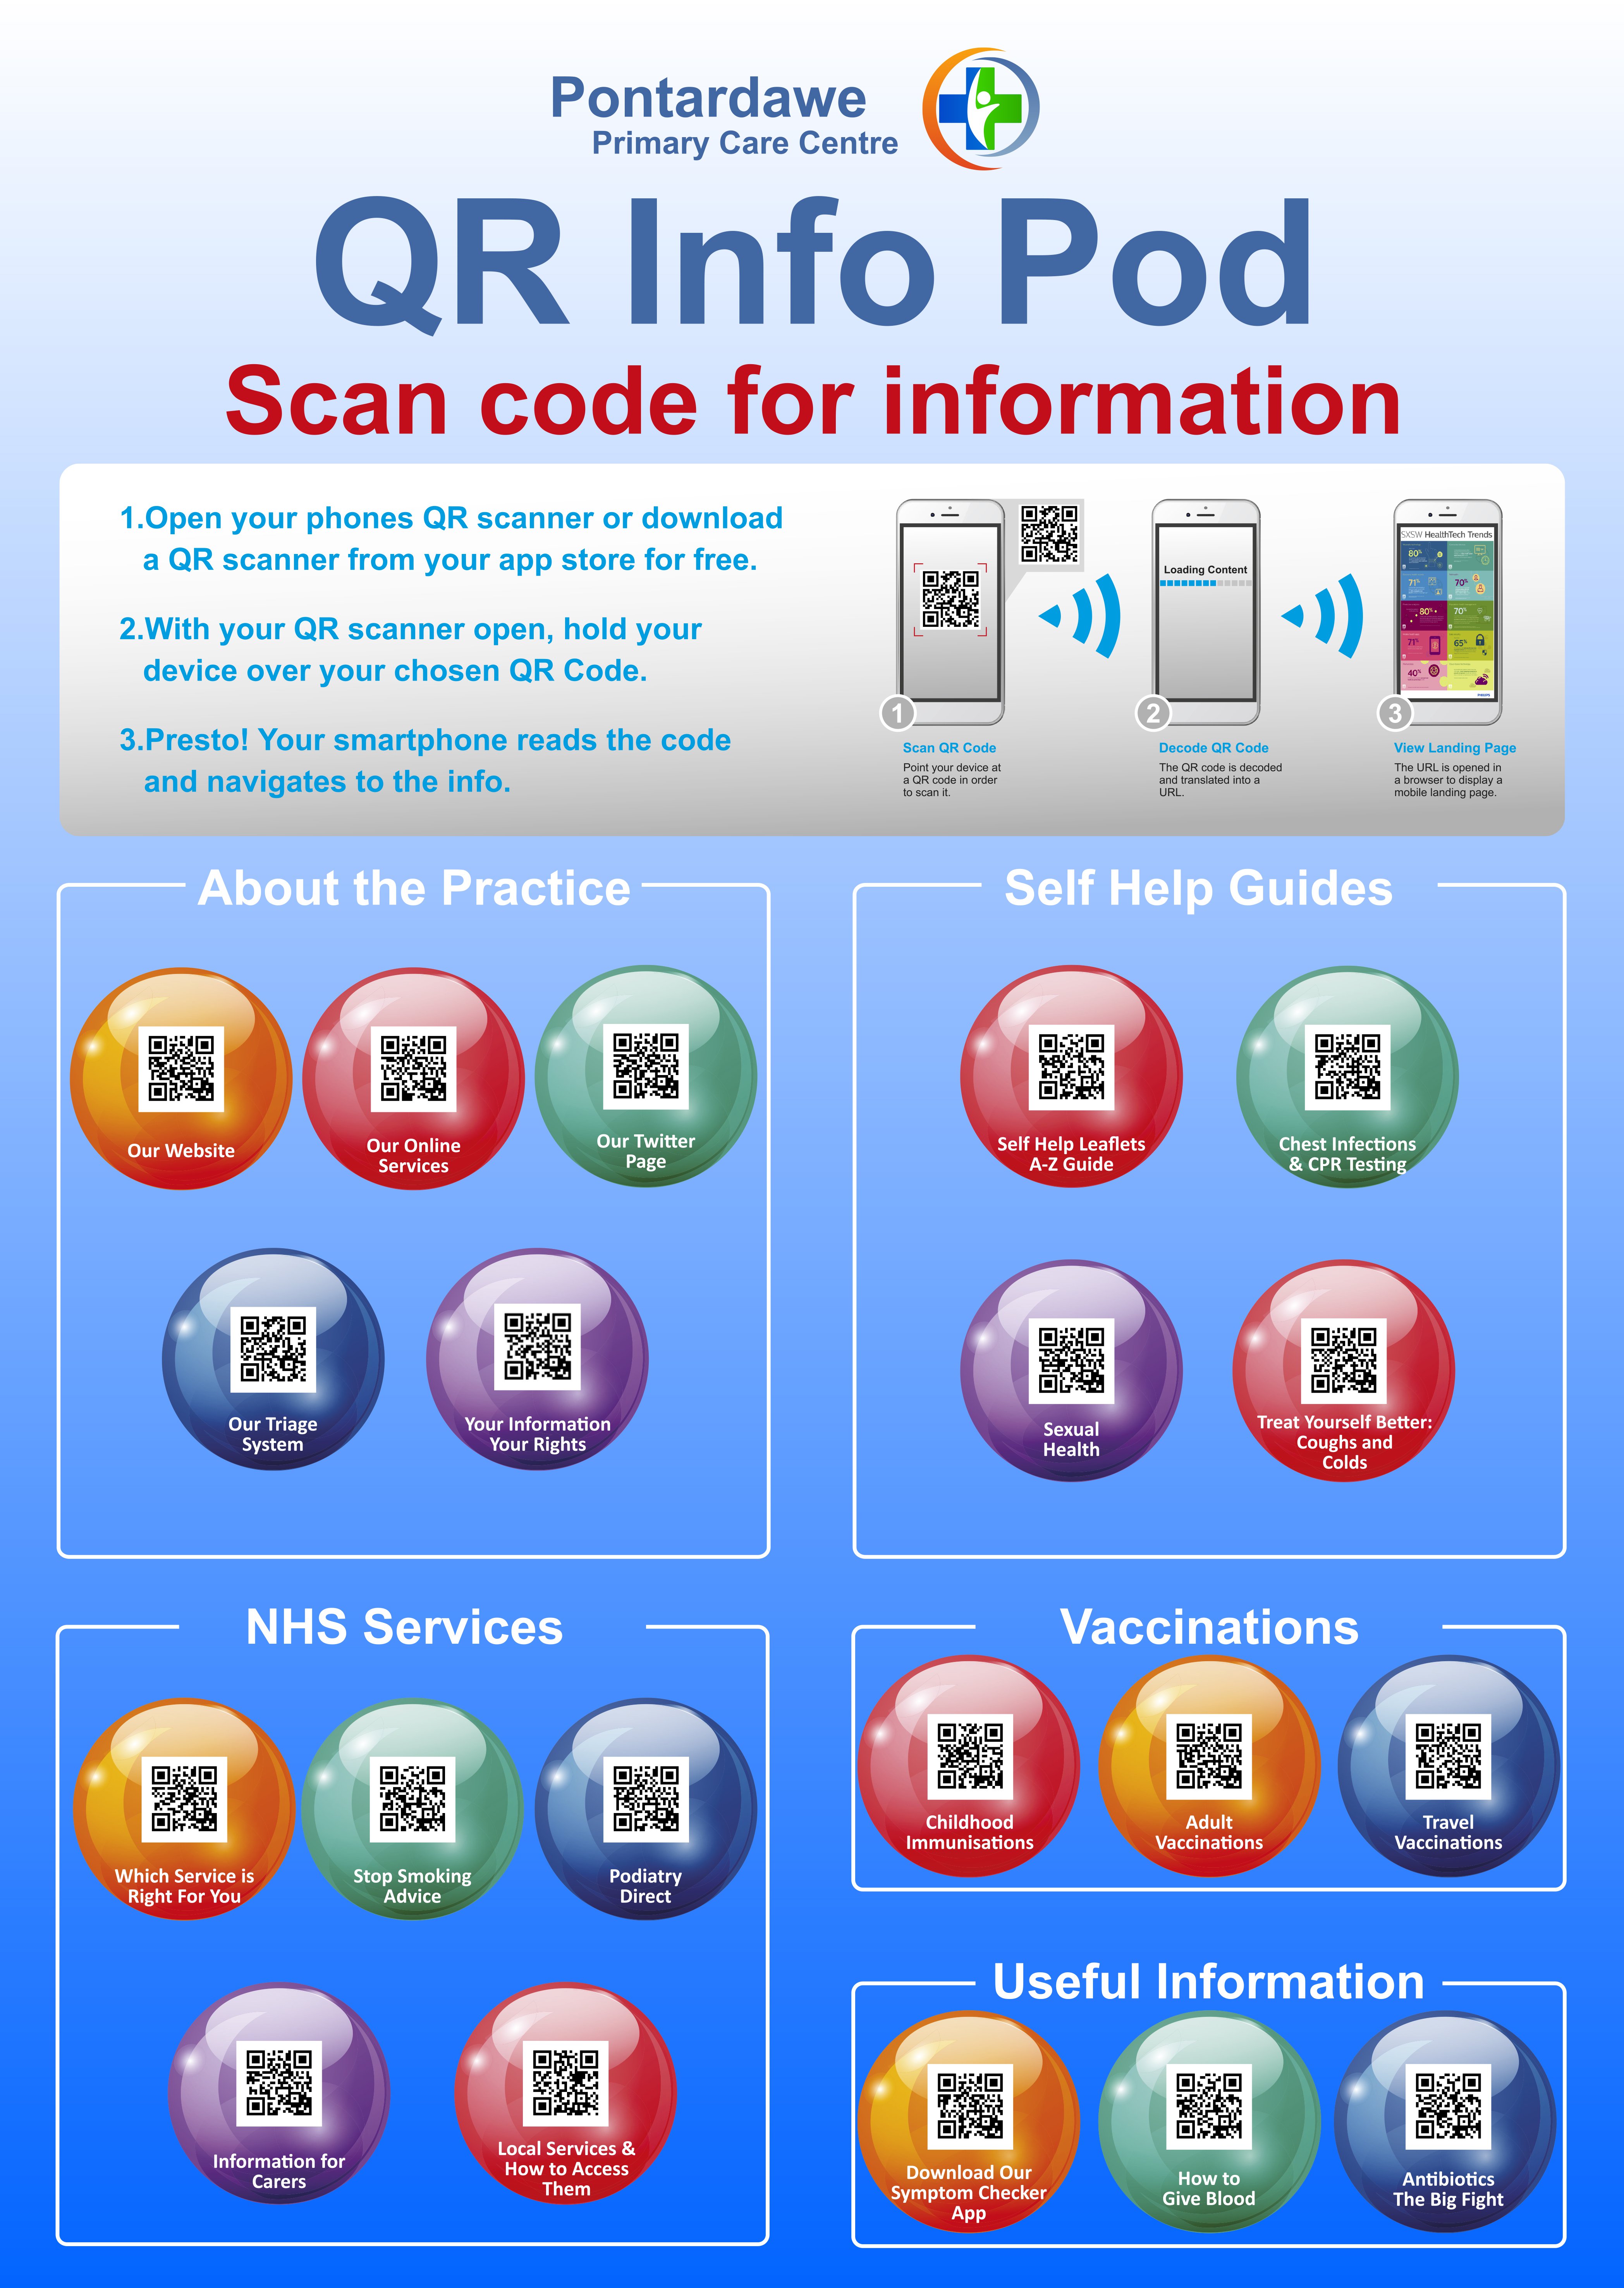 QRInfOPod - Improve patient communication & save thousands in printing costs featured image